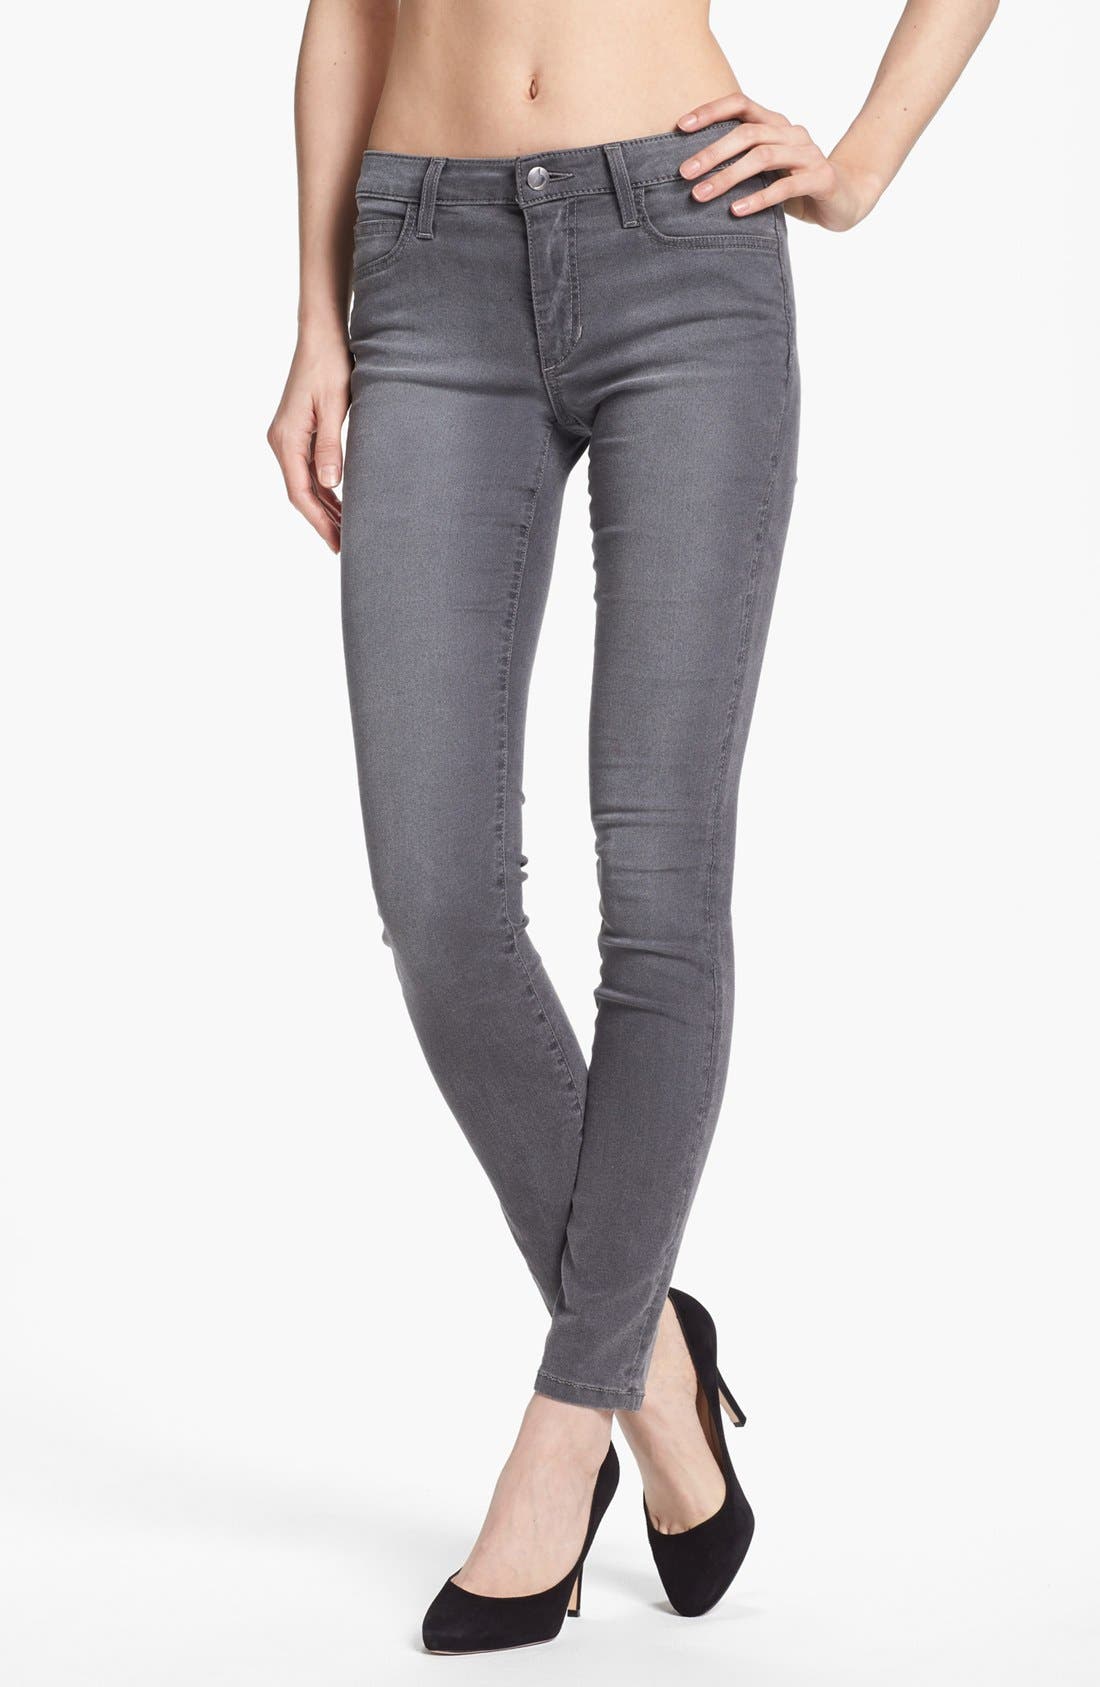 gray ankle jeans